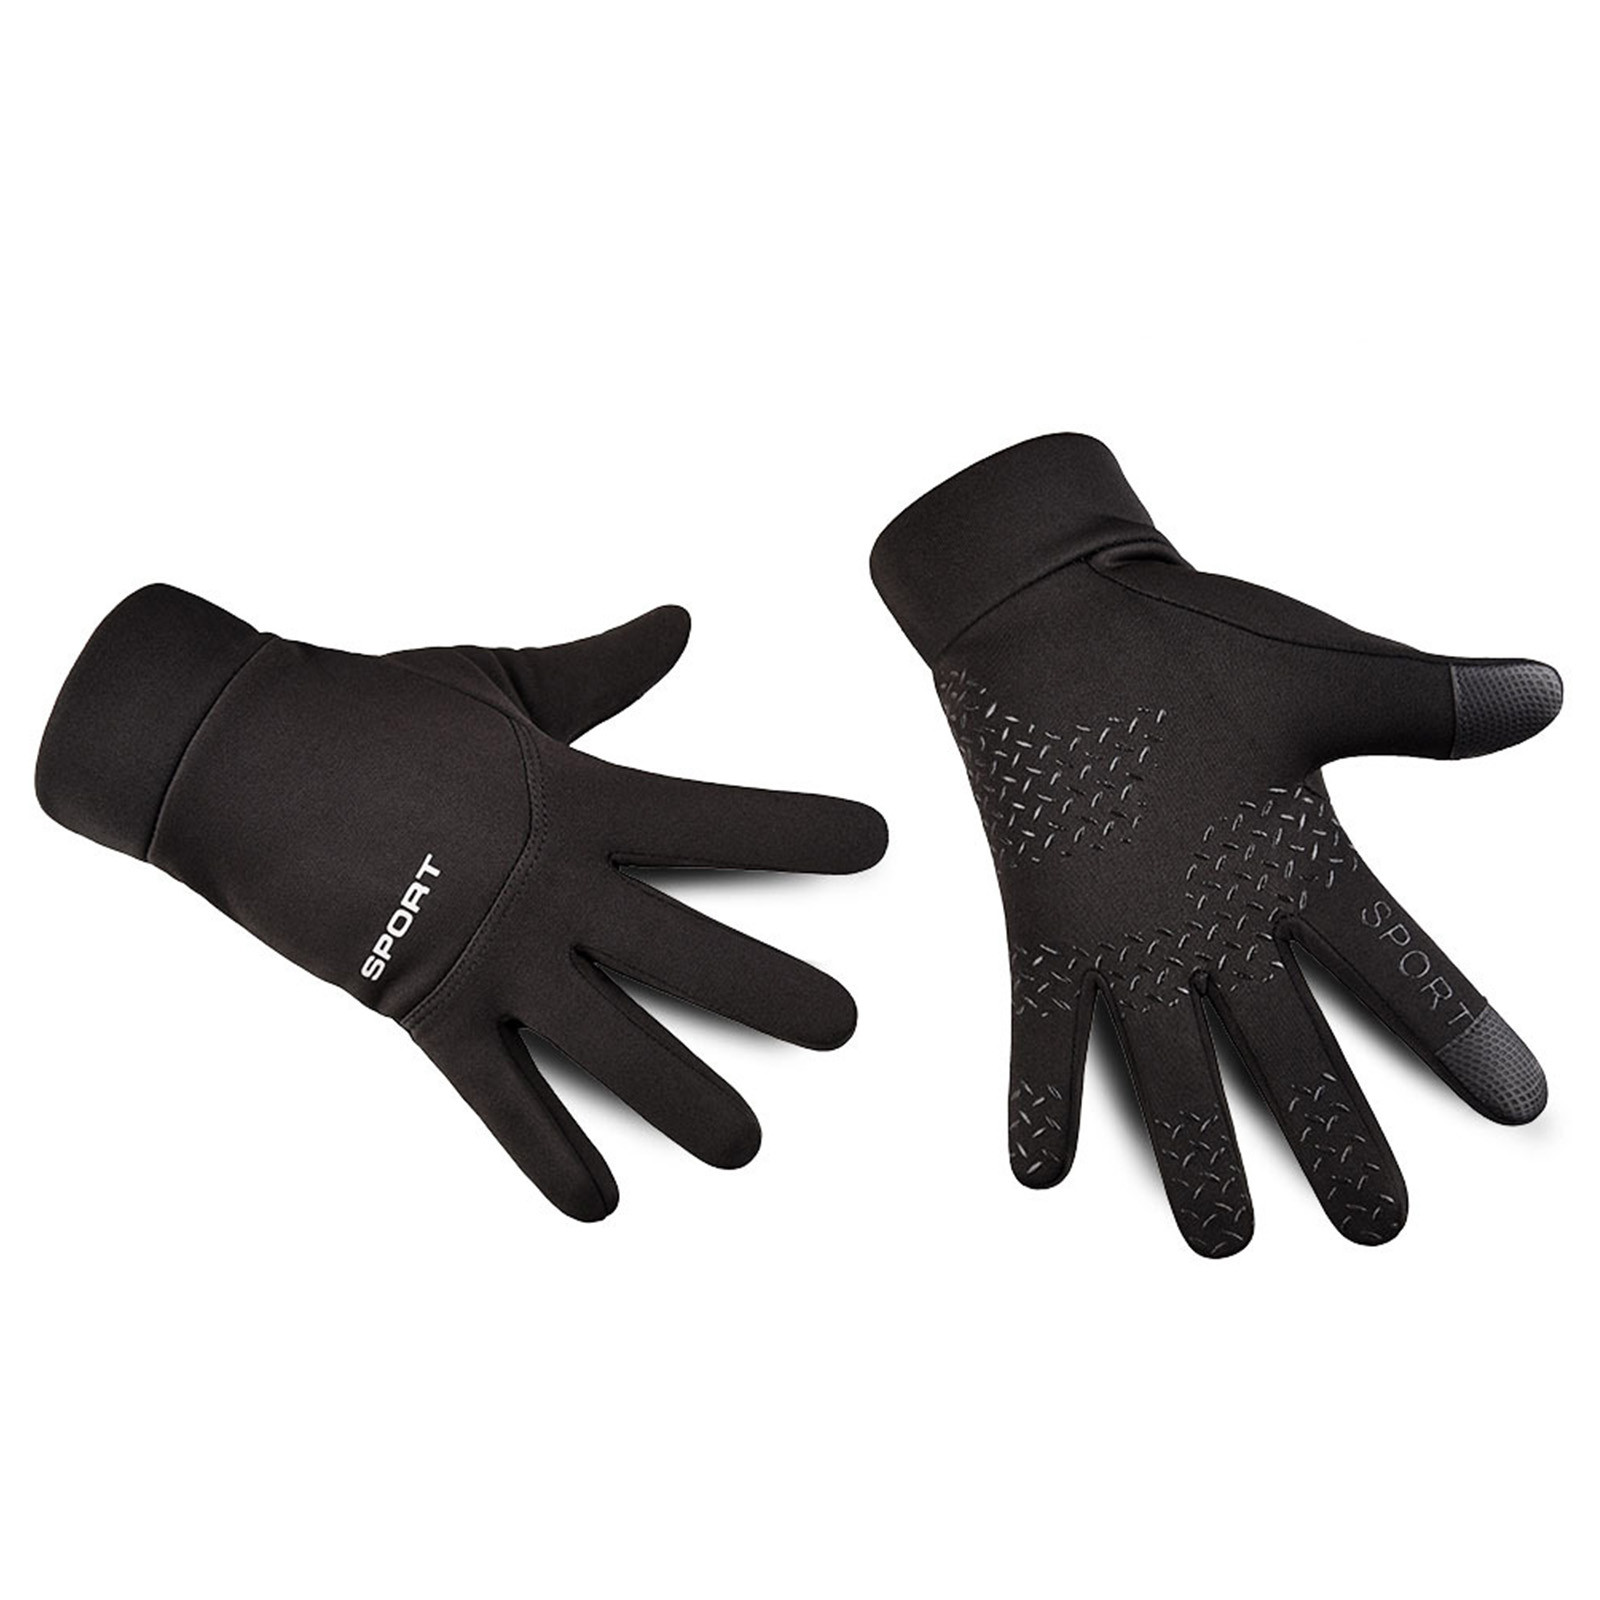 Cold-proof Ski Gloves Waterproof Winter Gloves Cycling Winter Warm Gloves For Touchscreen Cold Weather Windproof Non-Slip L1023